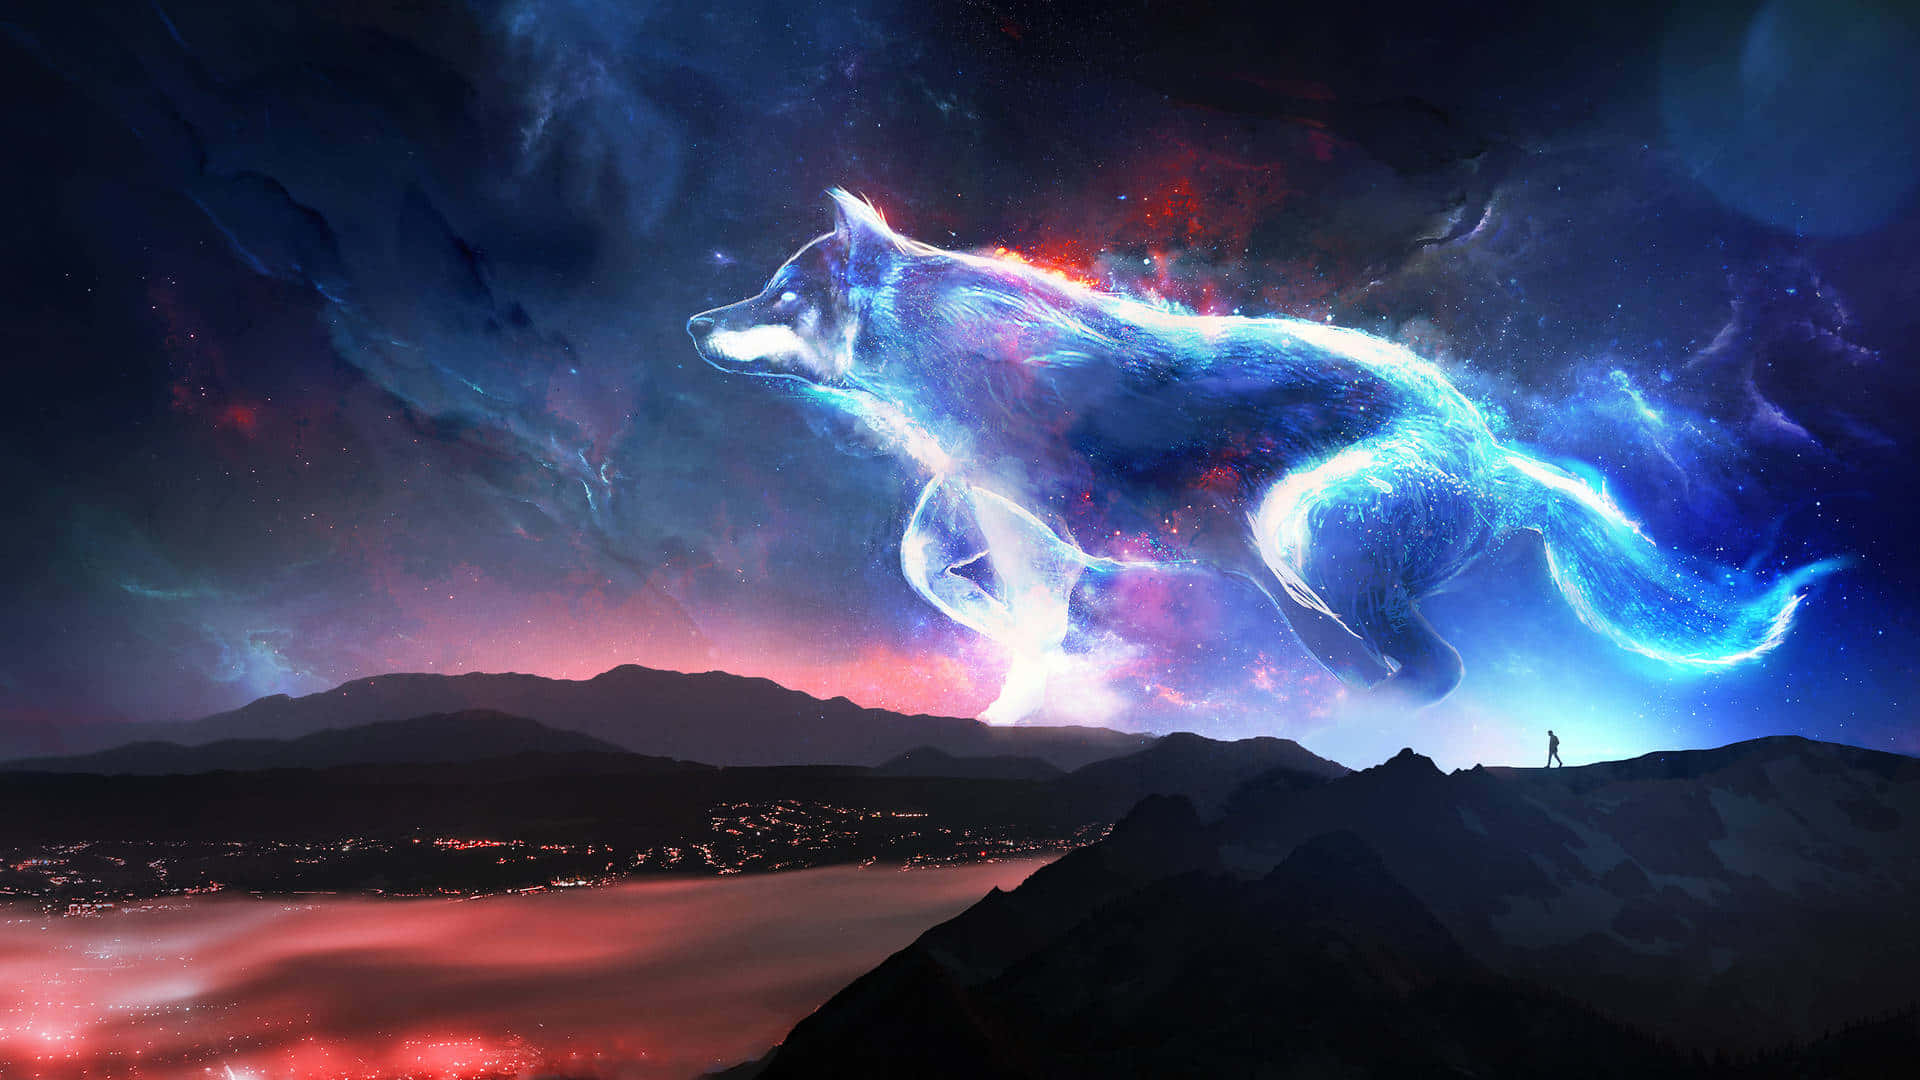 The majestic Galaxy Wolf stares ahead, transfixed in a breathtaking night sky.